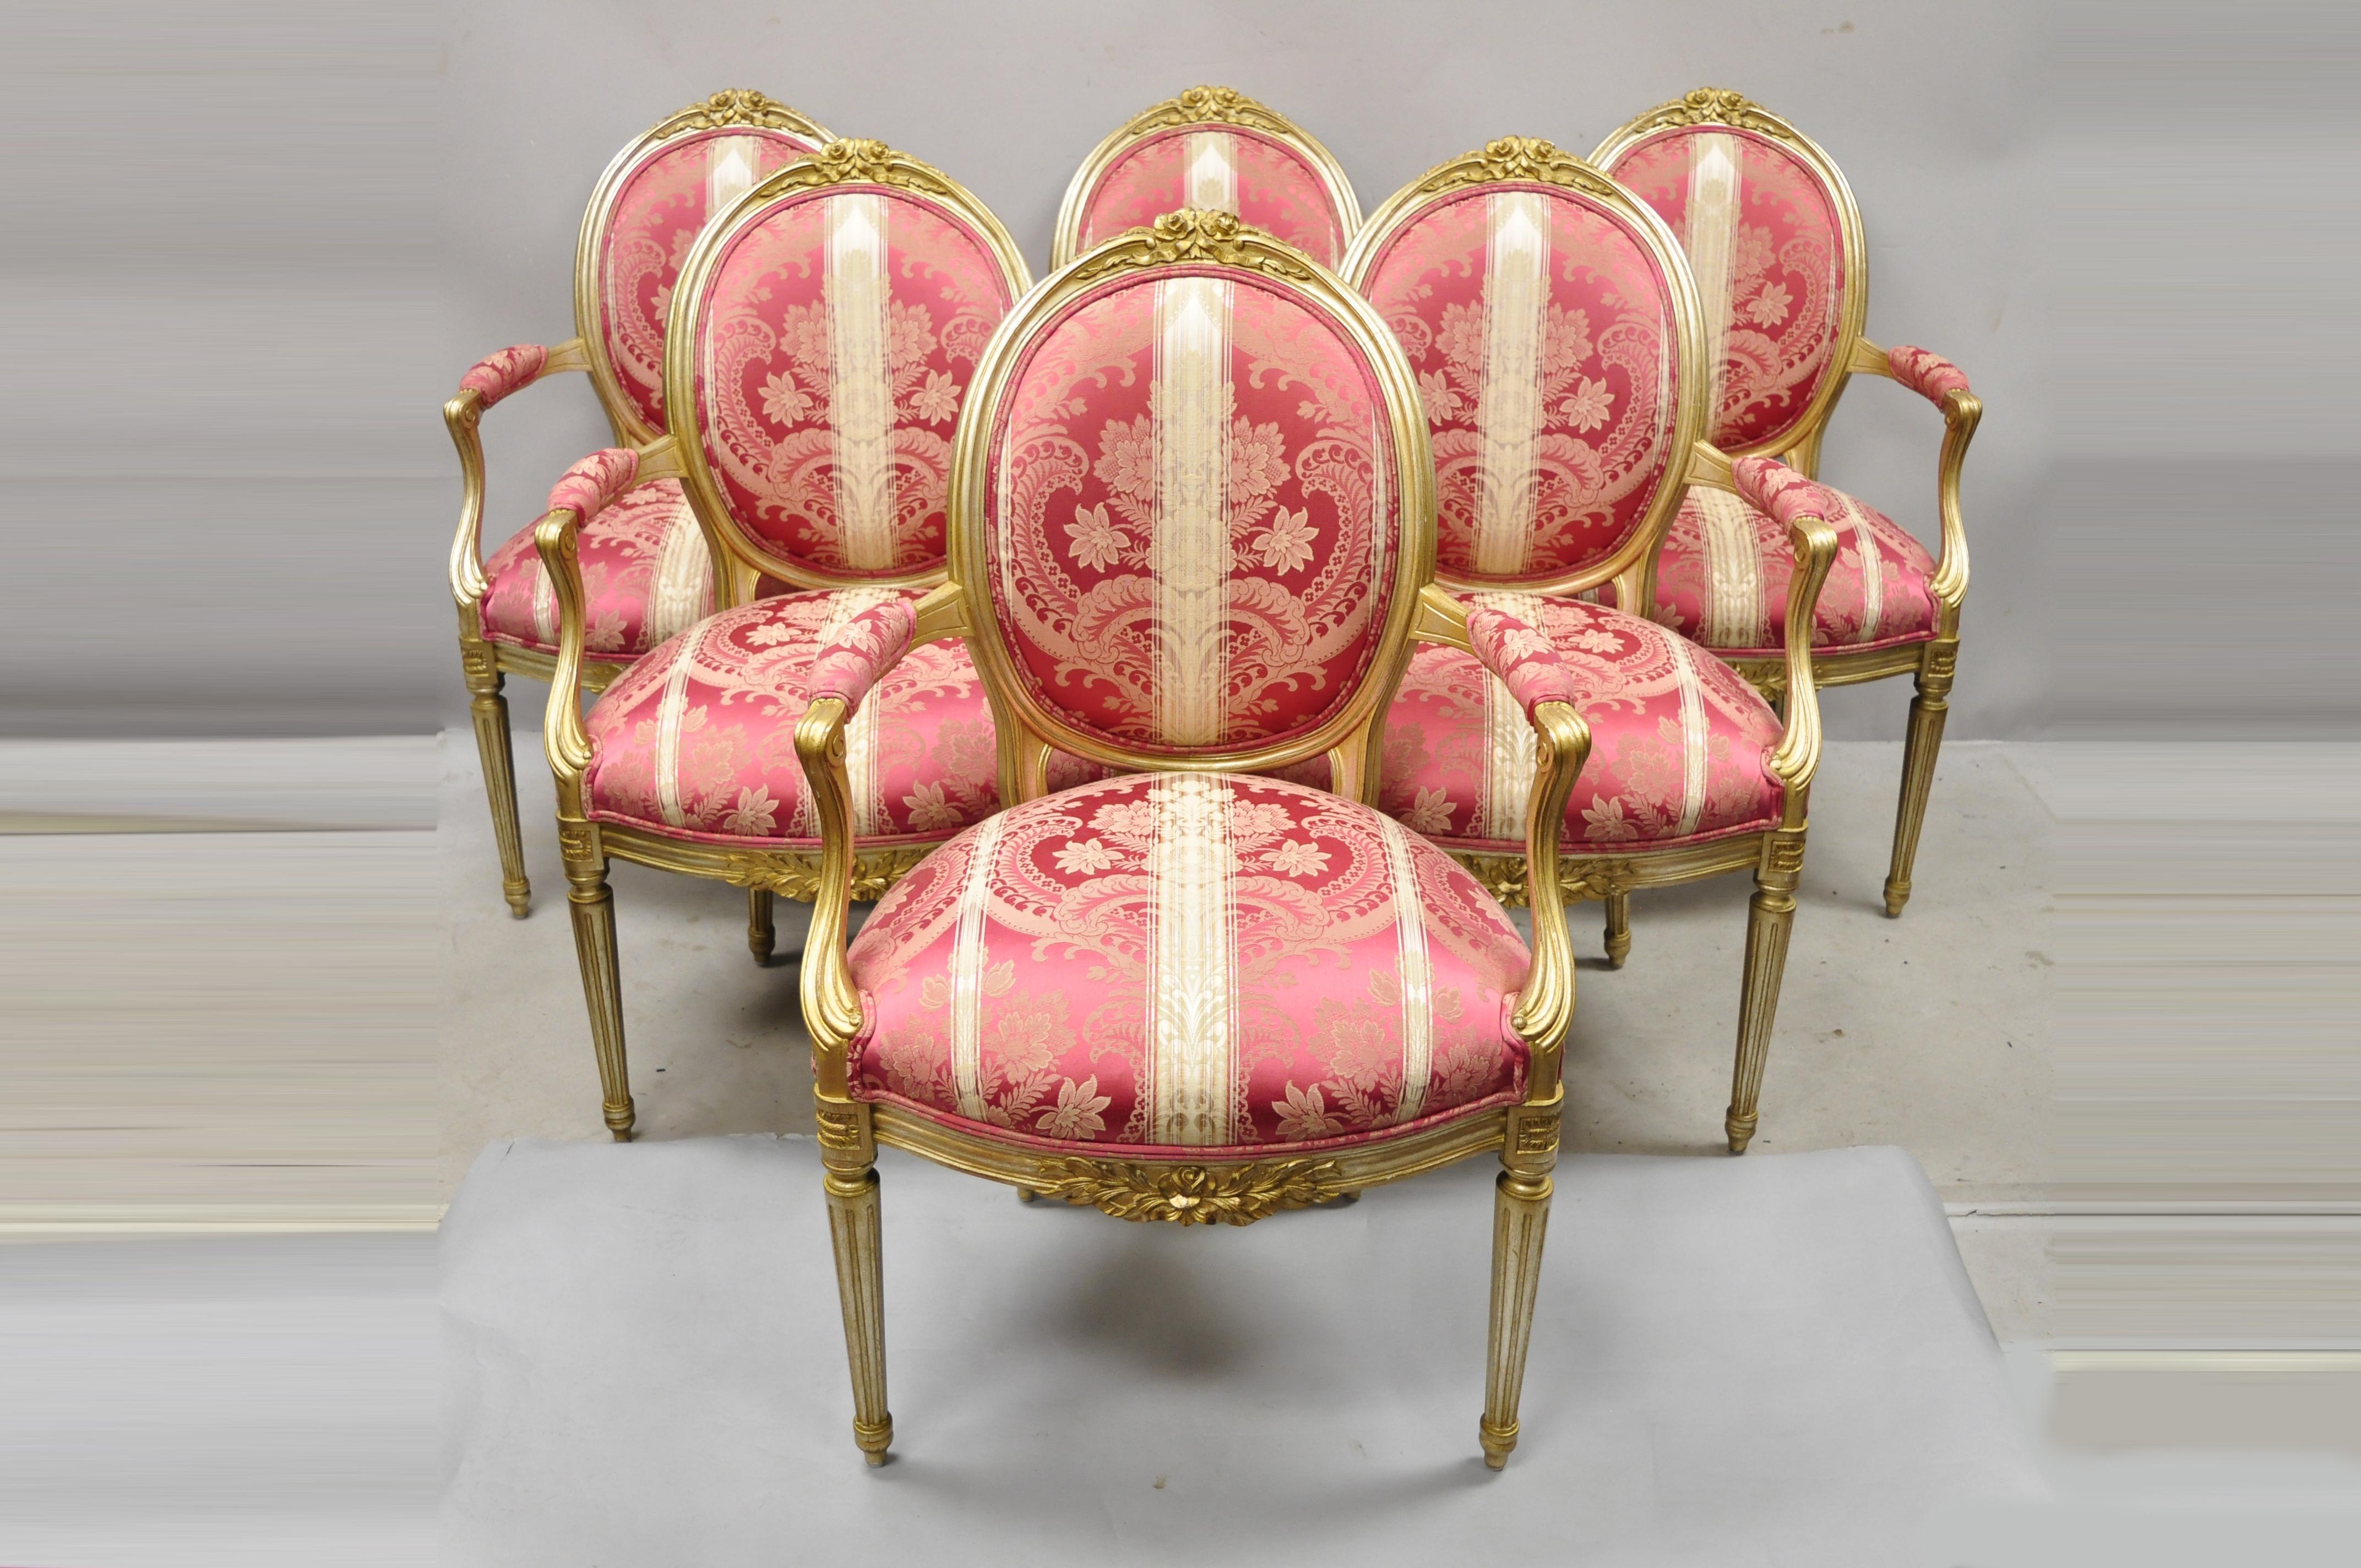 French Louis XVI Style Silver Gold Gilt Pink Damask Oval Back Arm Chairs, Pair For Sale 4